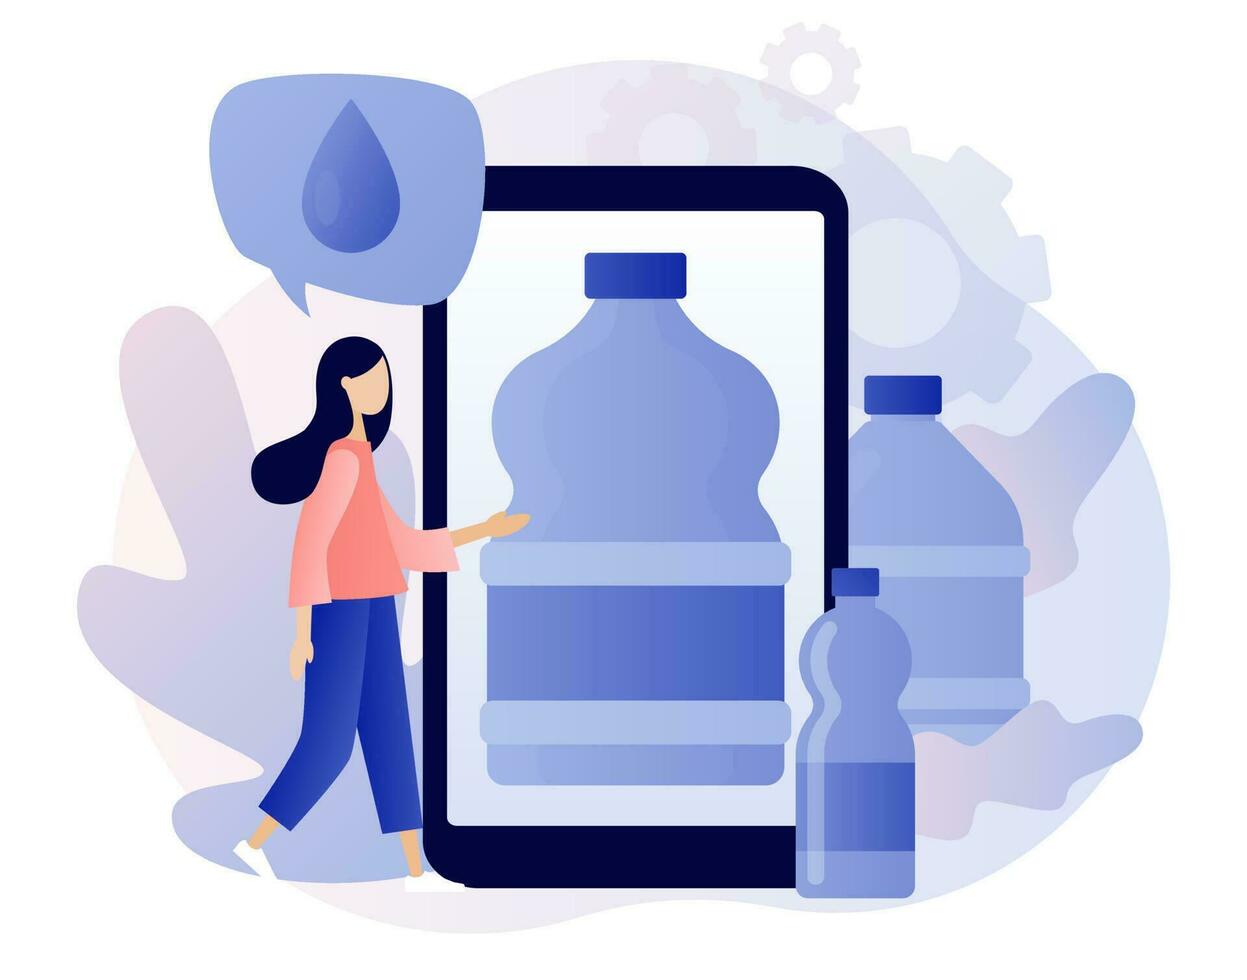 Bottled Water Delivery Service Poster With Man Delivering Bottle To Office,  Car Transporting Clean Aqua To Consumers And Cooler With Hot And Cold  Liquid Royalty Free SVG, Cliparts, Vectors, and Stock Illustration.